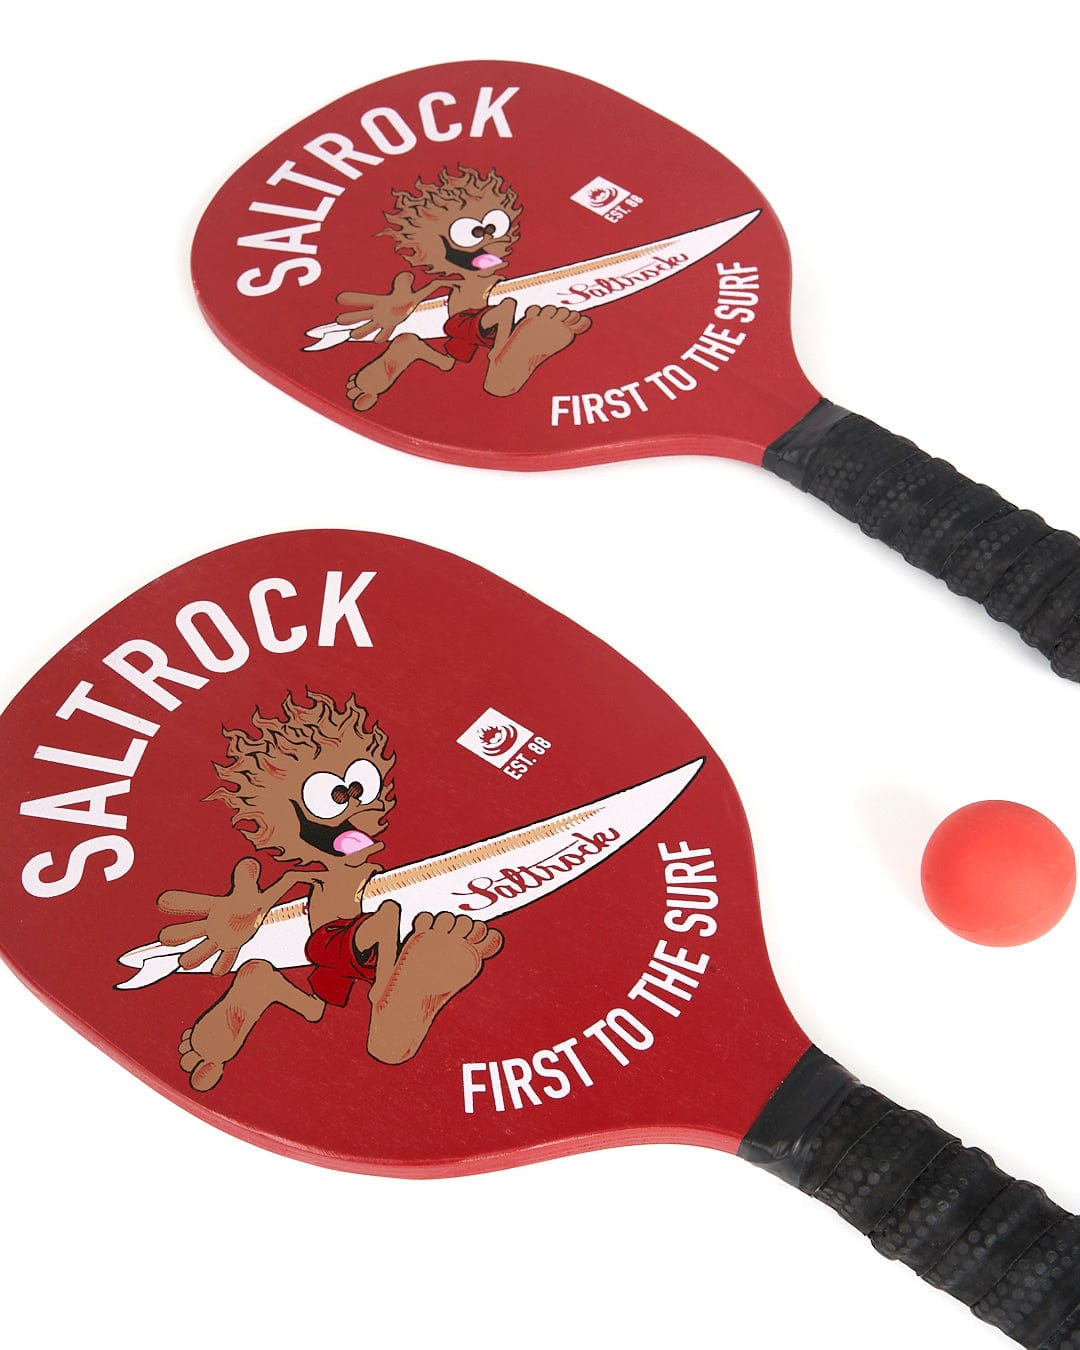 A Running Man - Bat And Ball - Red and a ball with the word Saltrock on it.